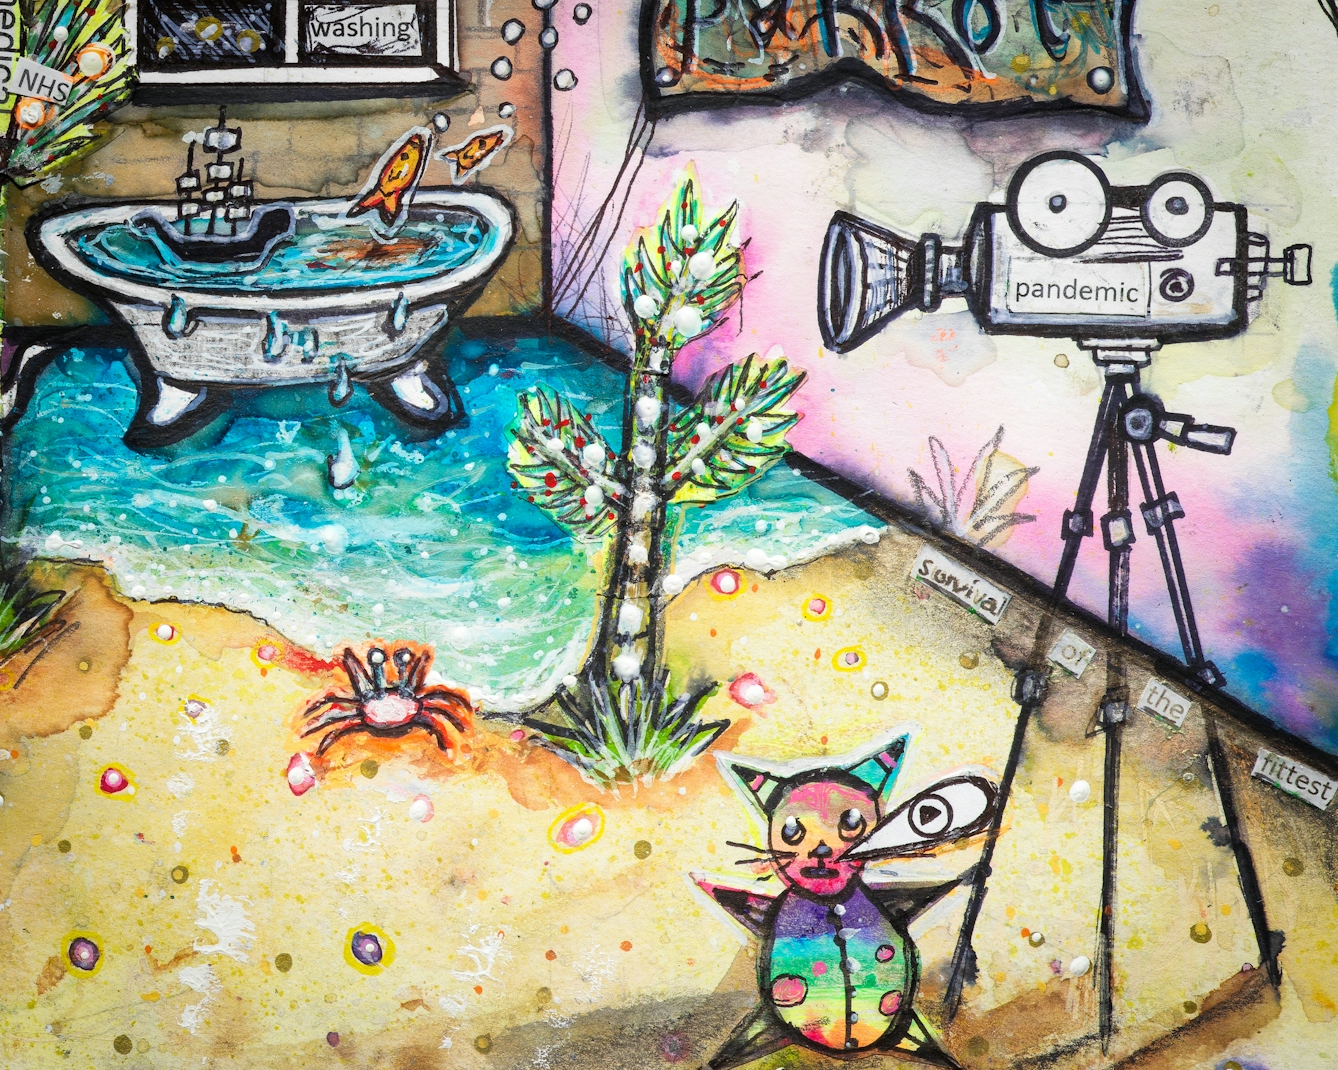 Artwork using watercolour and ink incorporating collaged words throughout the scene. The artwork shows a busy multi-coloured household room. In the background, a bath on which a small galleon sails, overflows with turquois water onto golden sand leading to the foreground where a video camera with the word ‘pandemic’ is mounted on a tripod. Beneath the video camera there is a rainbow coloured cat with a speech bubble and with the letter ‘P’ in it.